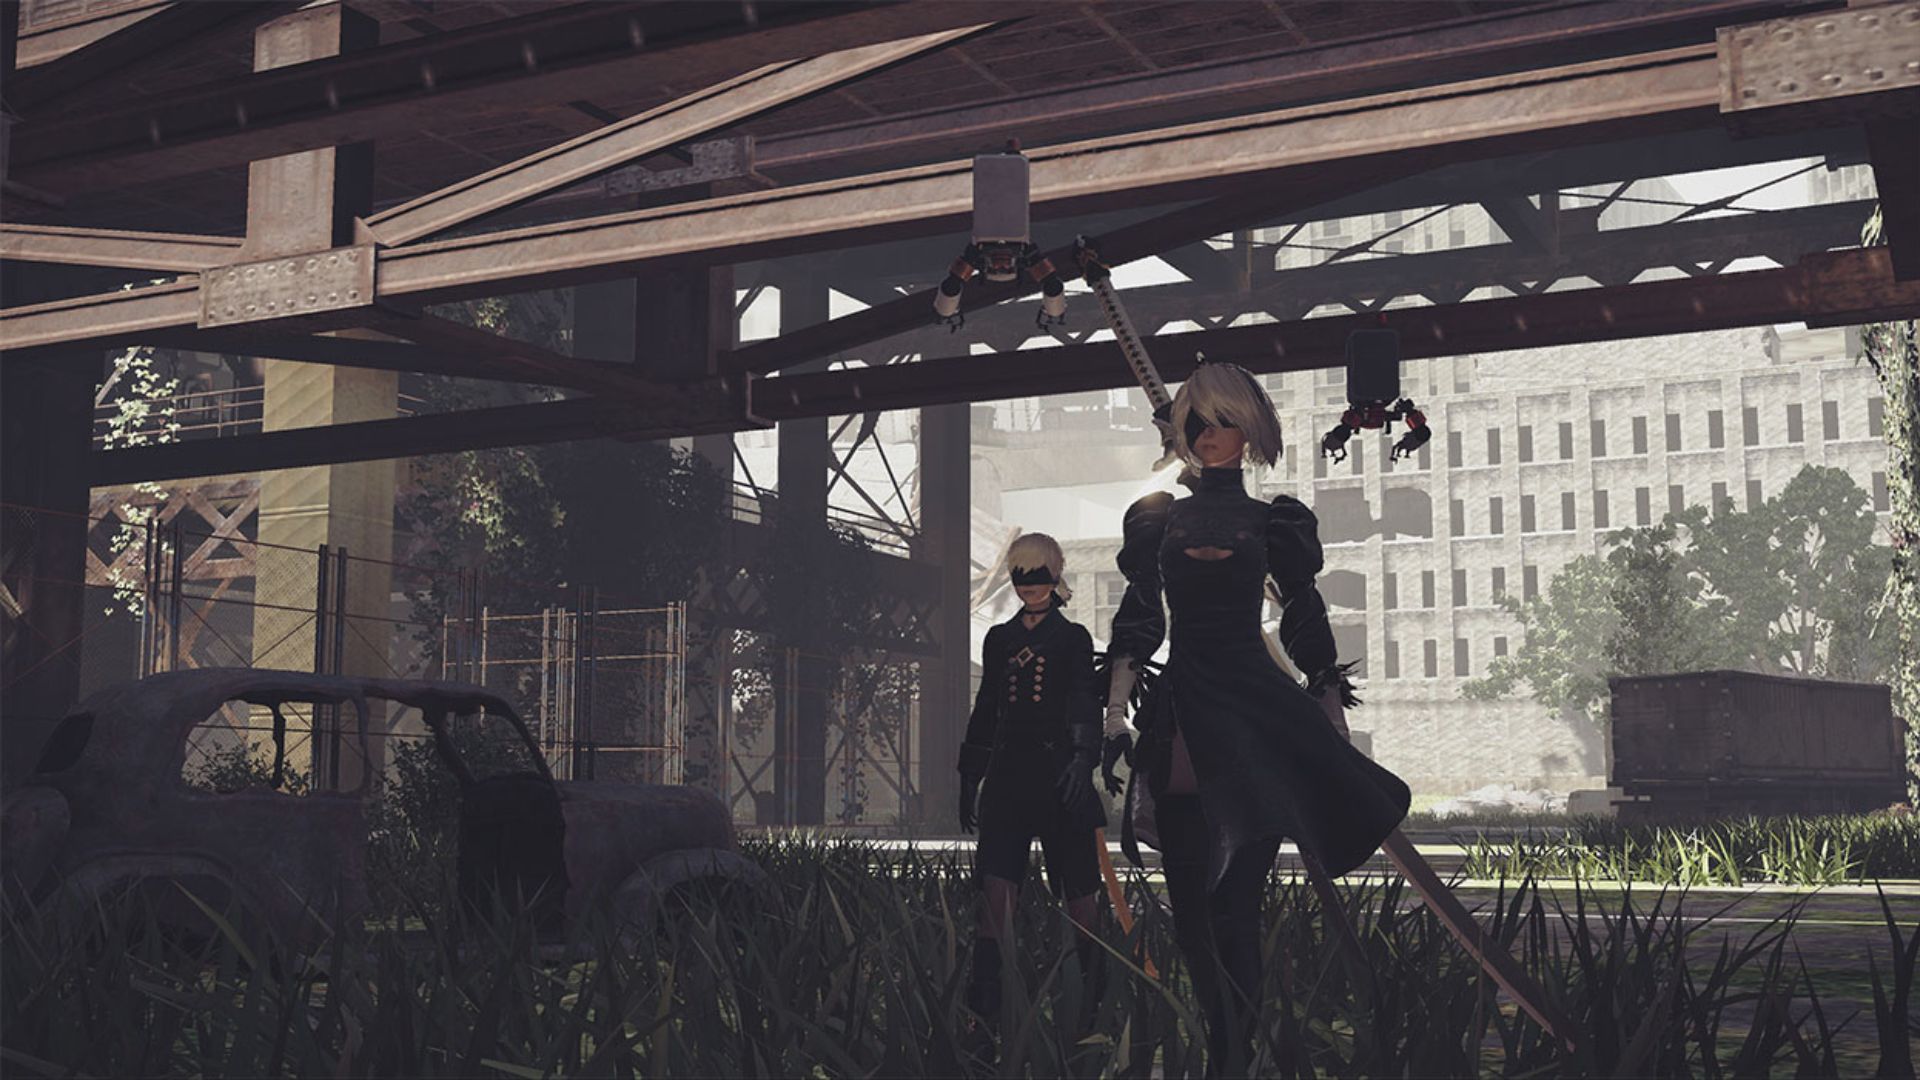 9S and 2B walking through a dilapidated mall in Nier Automata. There is moss growing one things, they look calm, and a pod is floating above each of their heads (Pods are like drones but boxier).